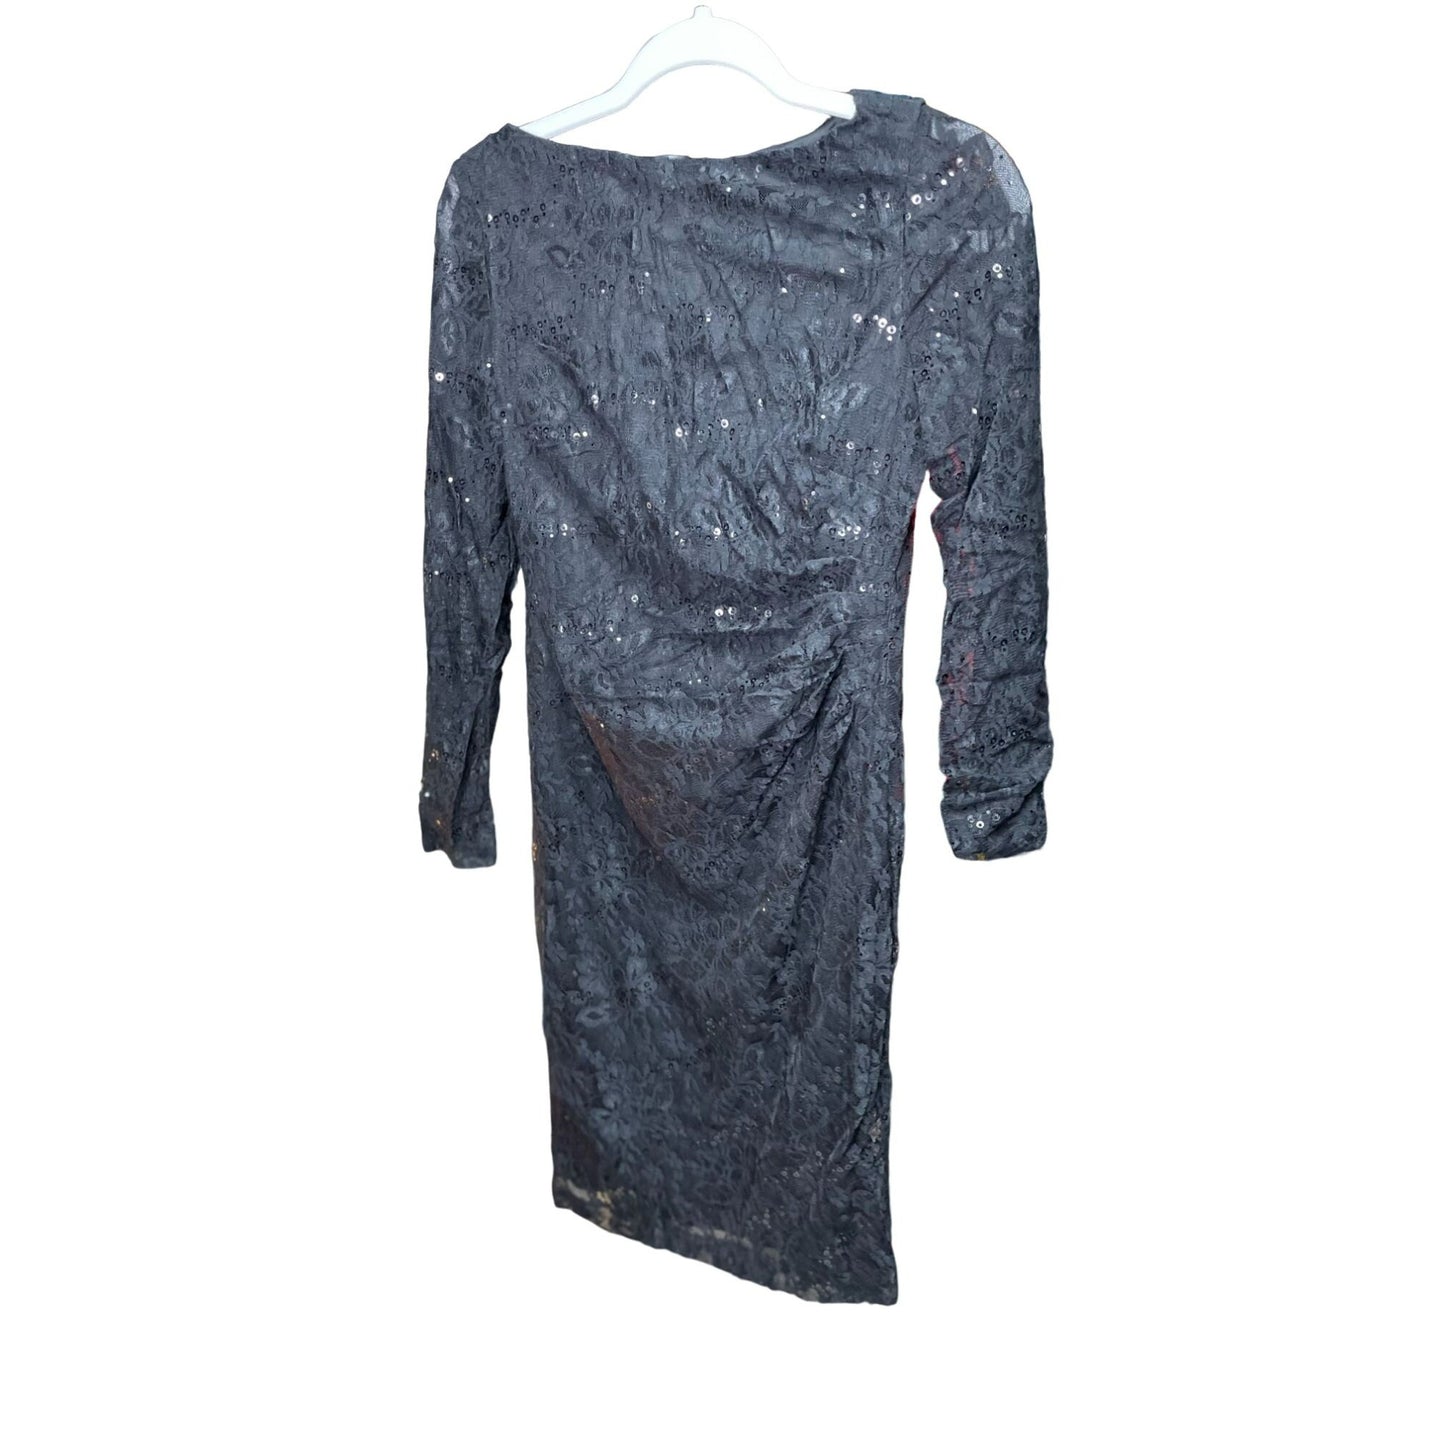 Chaps 3/4 Sleeve Lace Sequin Detail Ruched Evening/Cocktail Mini Dress Black 2